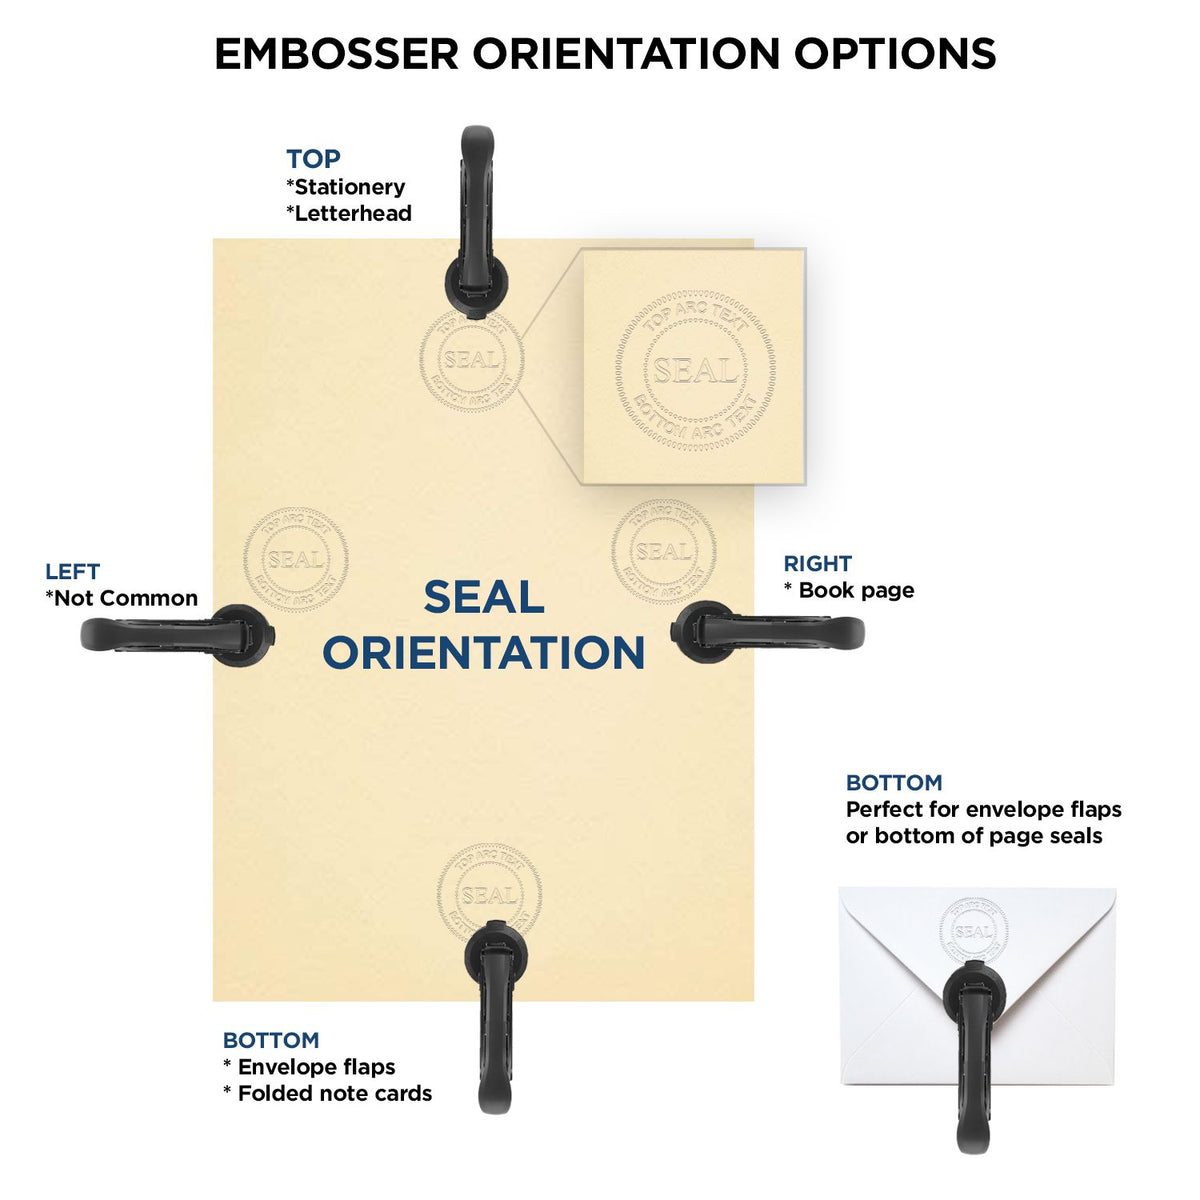 An infographic for the Soft Pocket Kansas Landscape Architect Embosser showing embosser orientation, this is showing examples of a top, bottom, right and left insert.